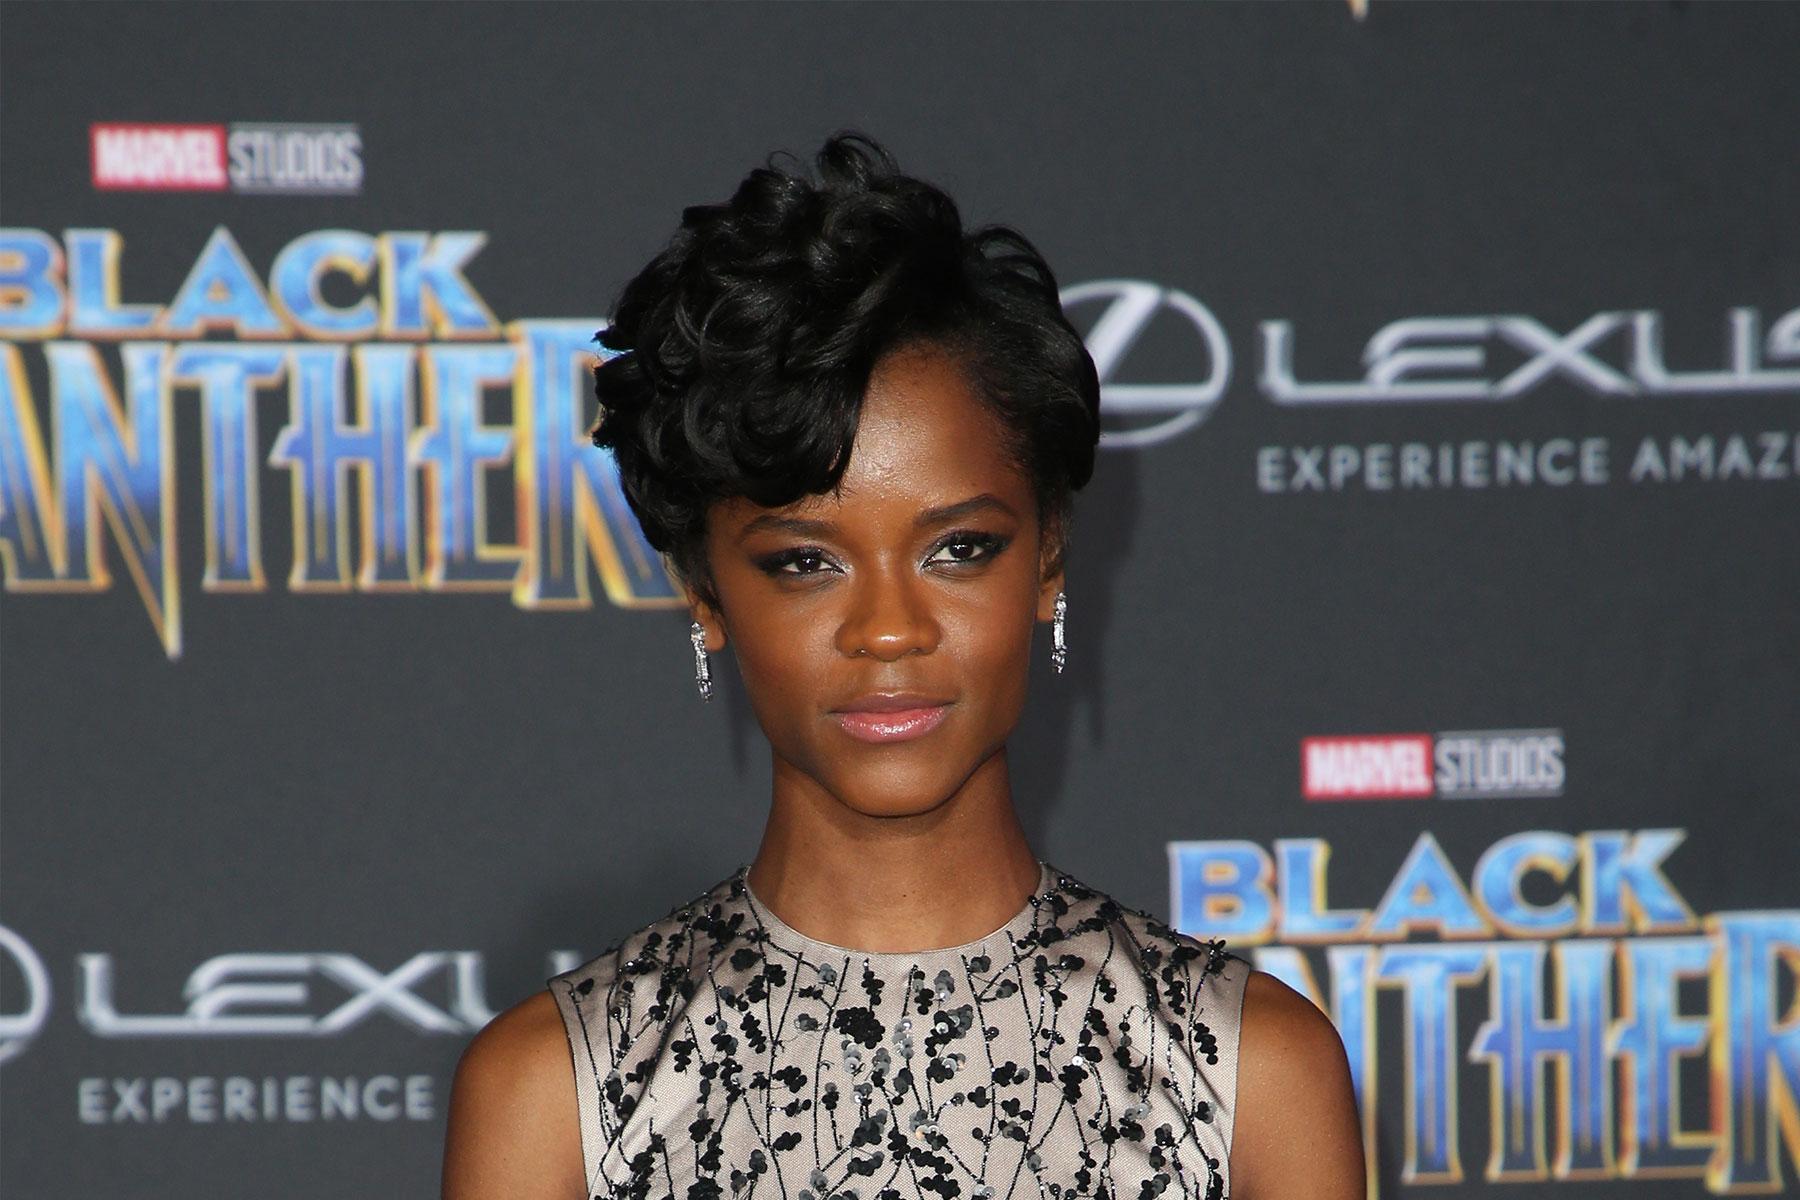 Letitia Wright to play double role in thriller 'The Silent Twins'